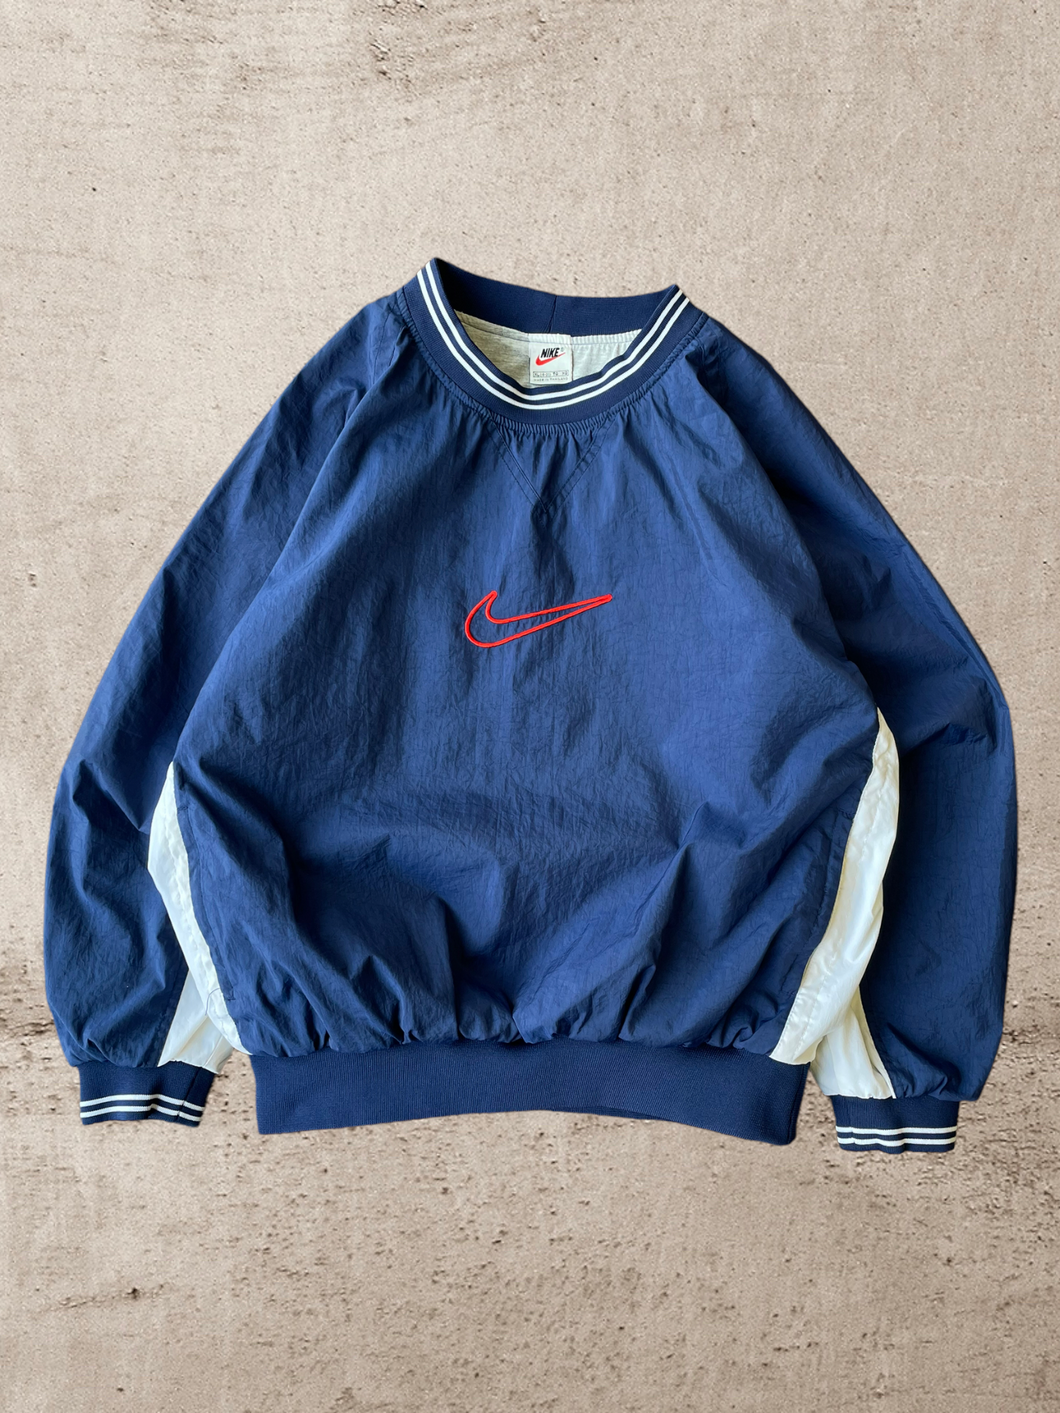 90s Nike Pullover - Large